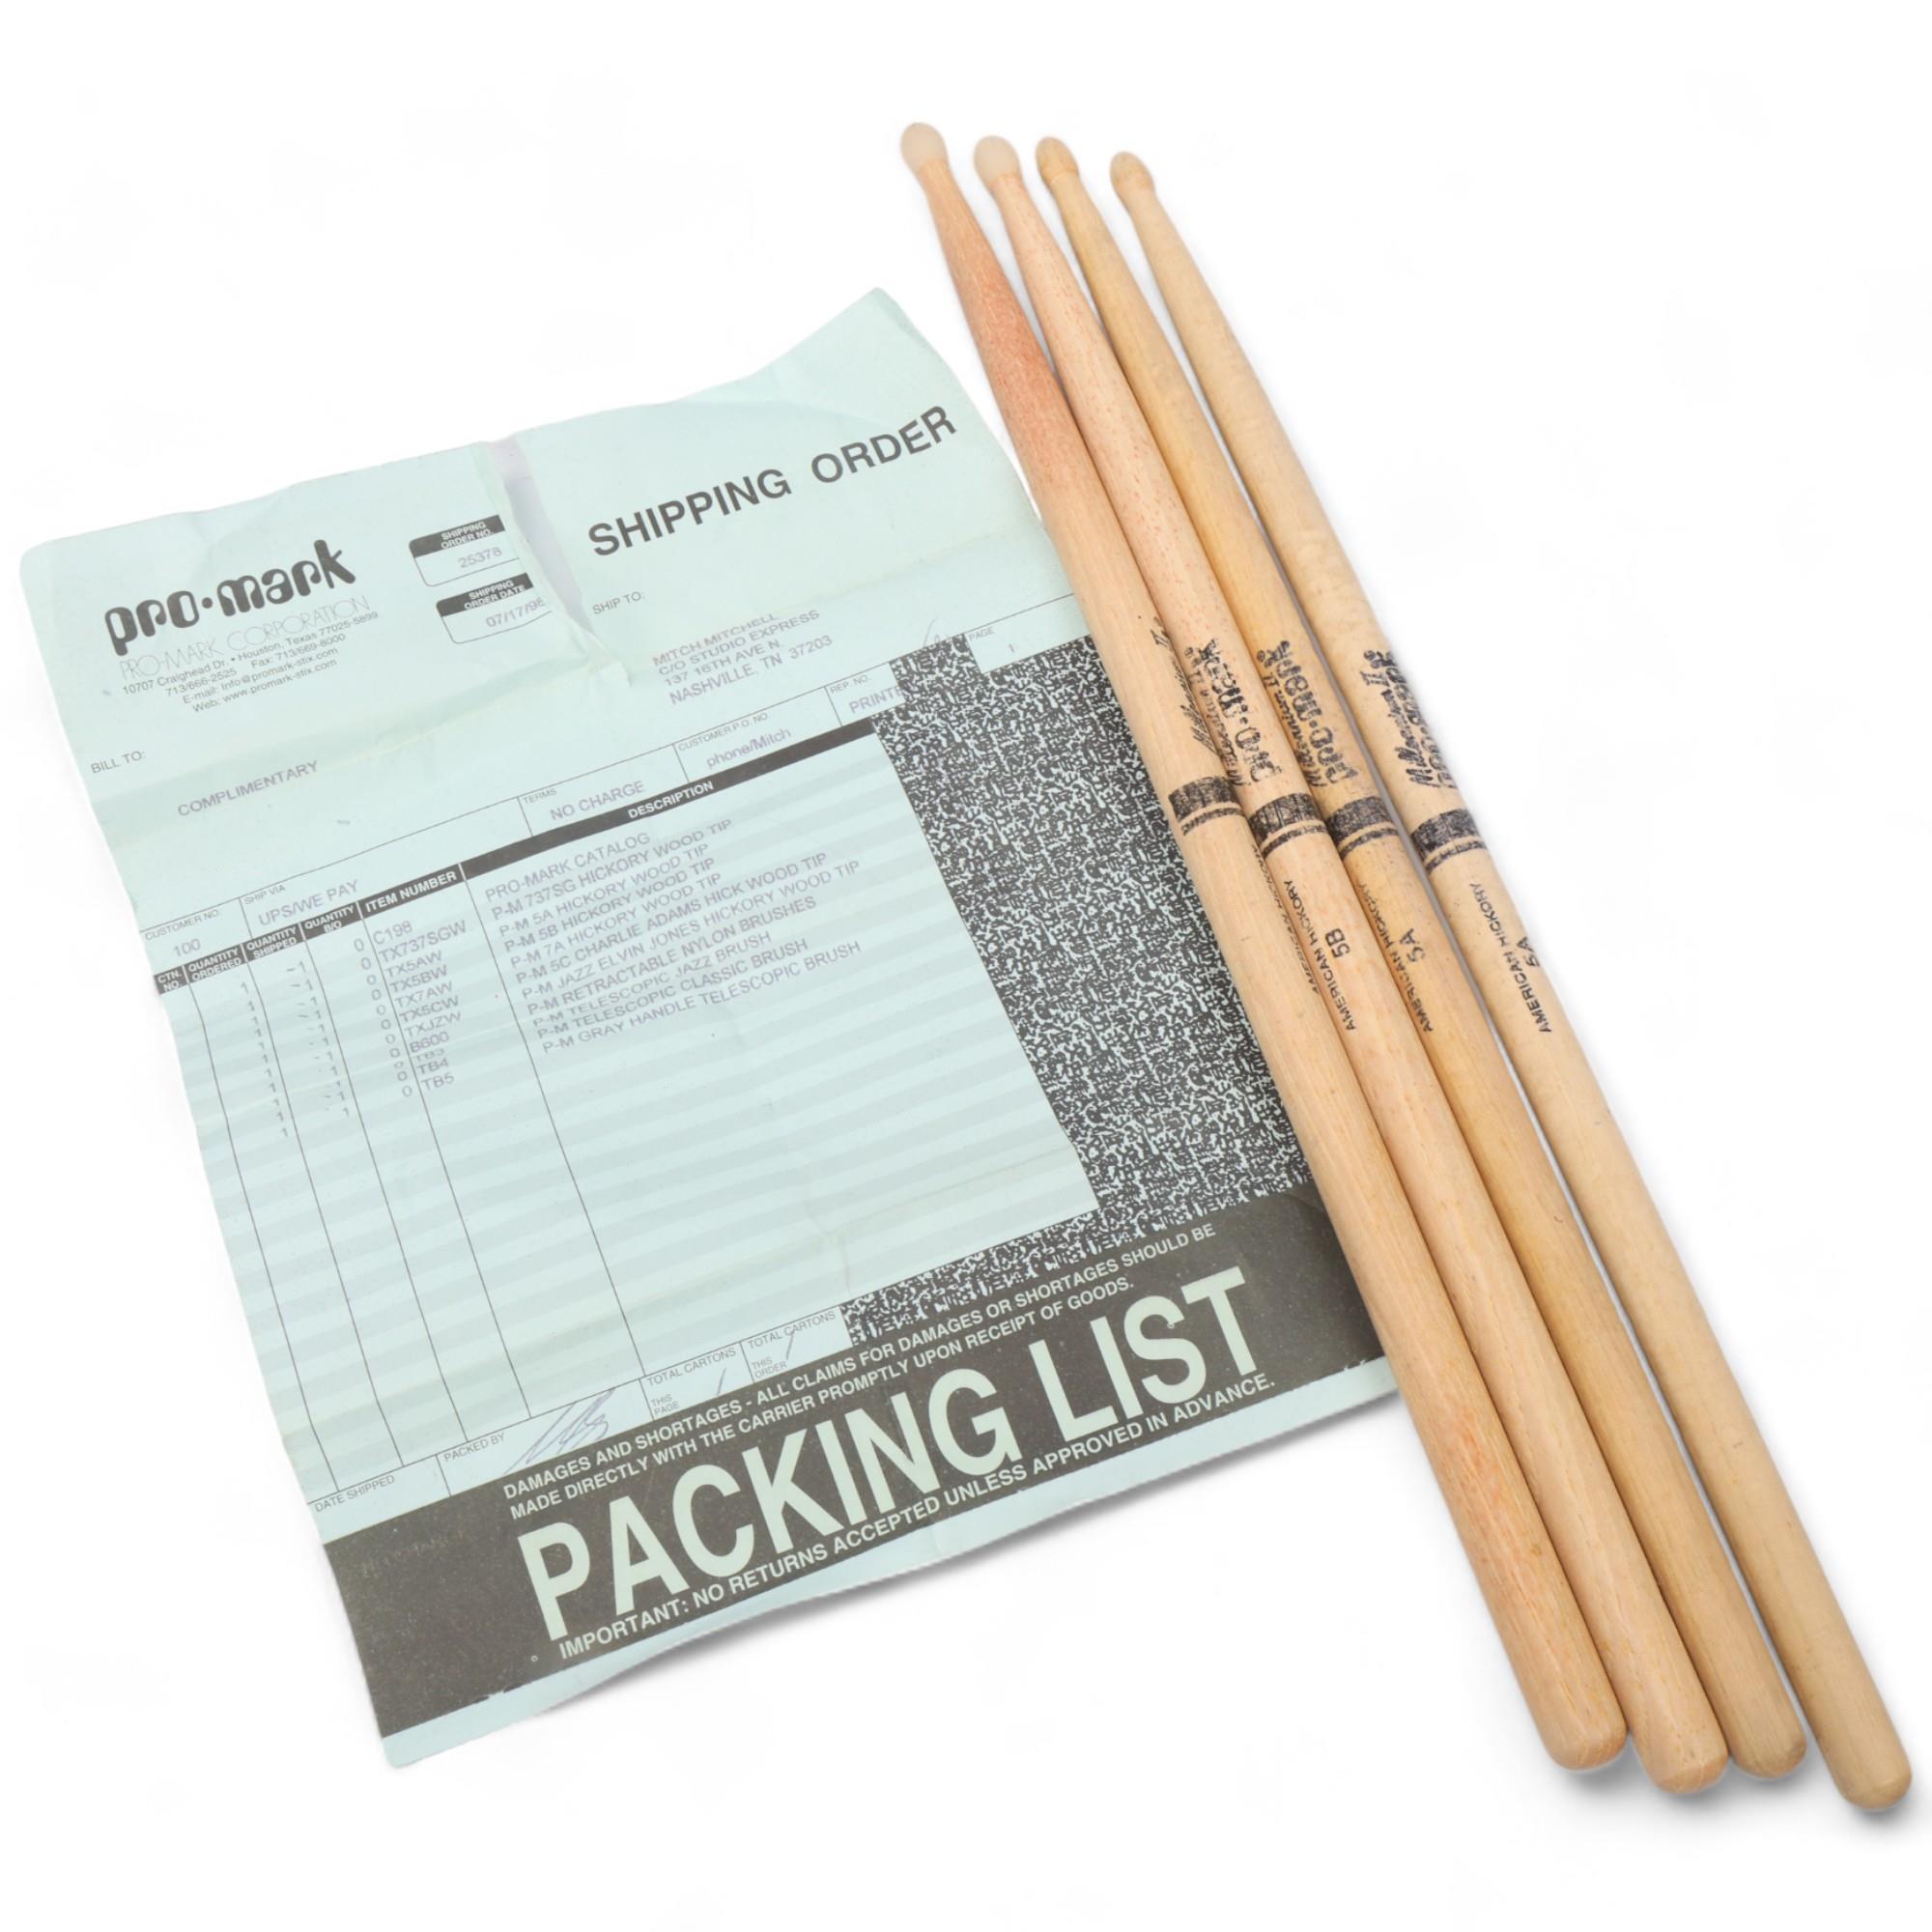 Four USED PROMARK Hickory DRUMSTICKS belonging to MITCH MITCHELL - with original Promark invoice